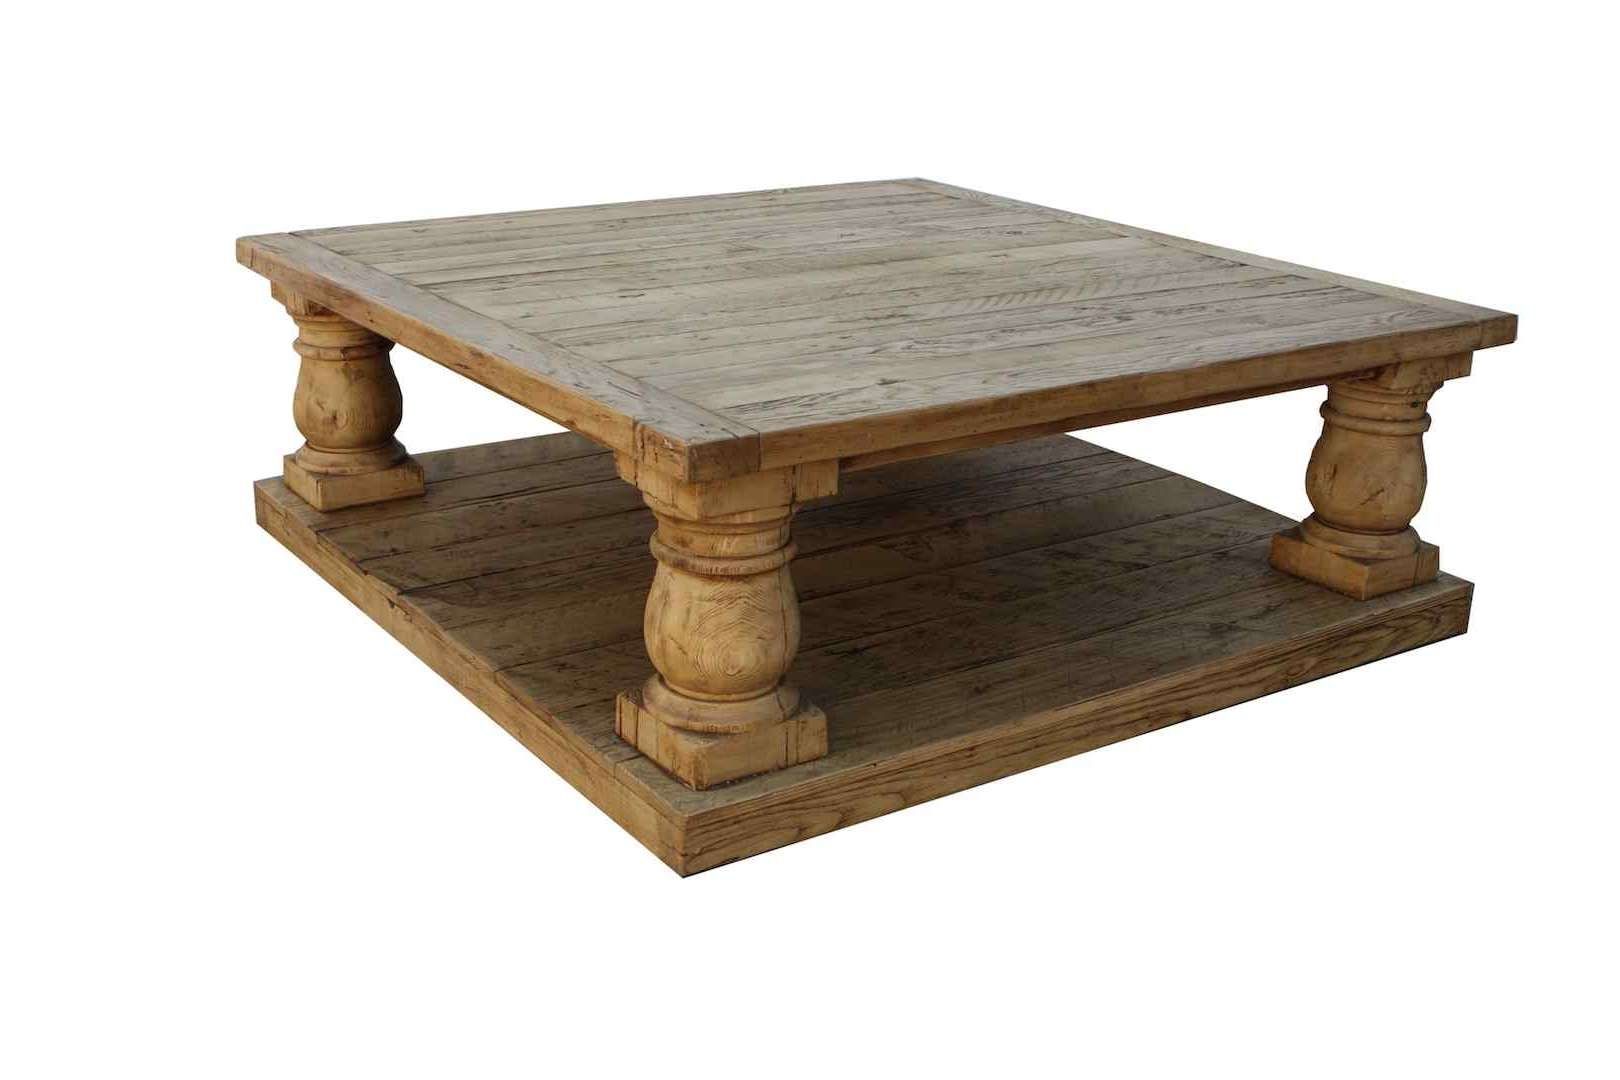 Fashionable Square Wooden Coffee Table Within Square Wood Coffee Table For Natural Ambience Of Living Room (View 11 of 20)